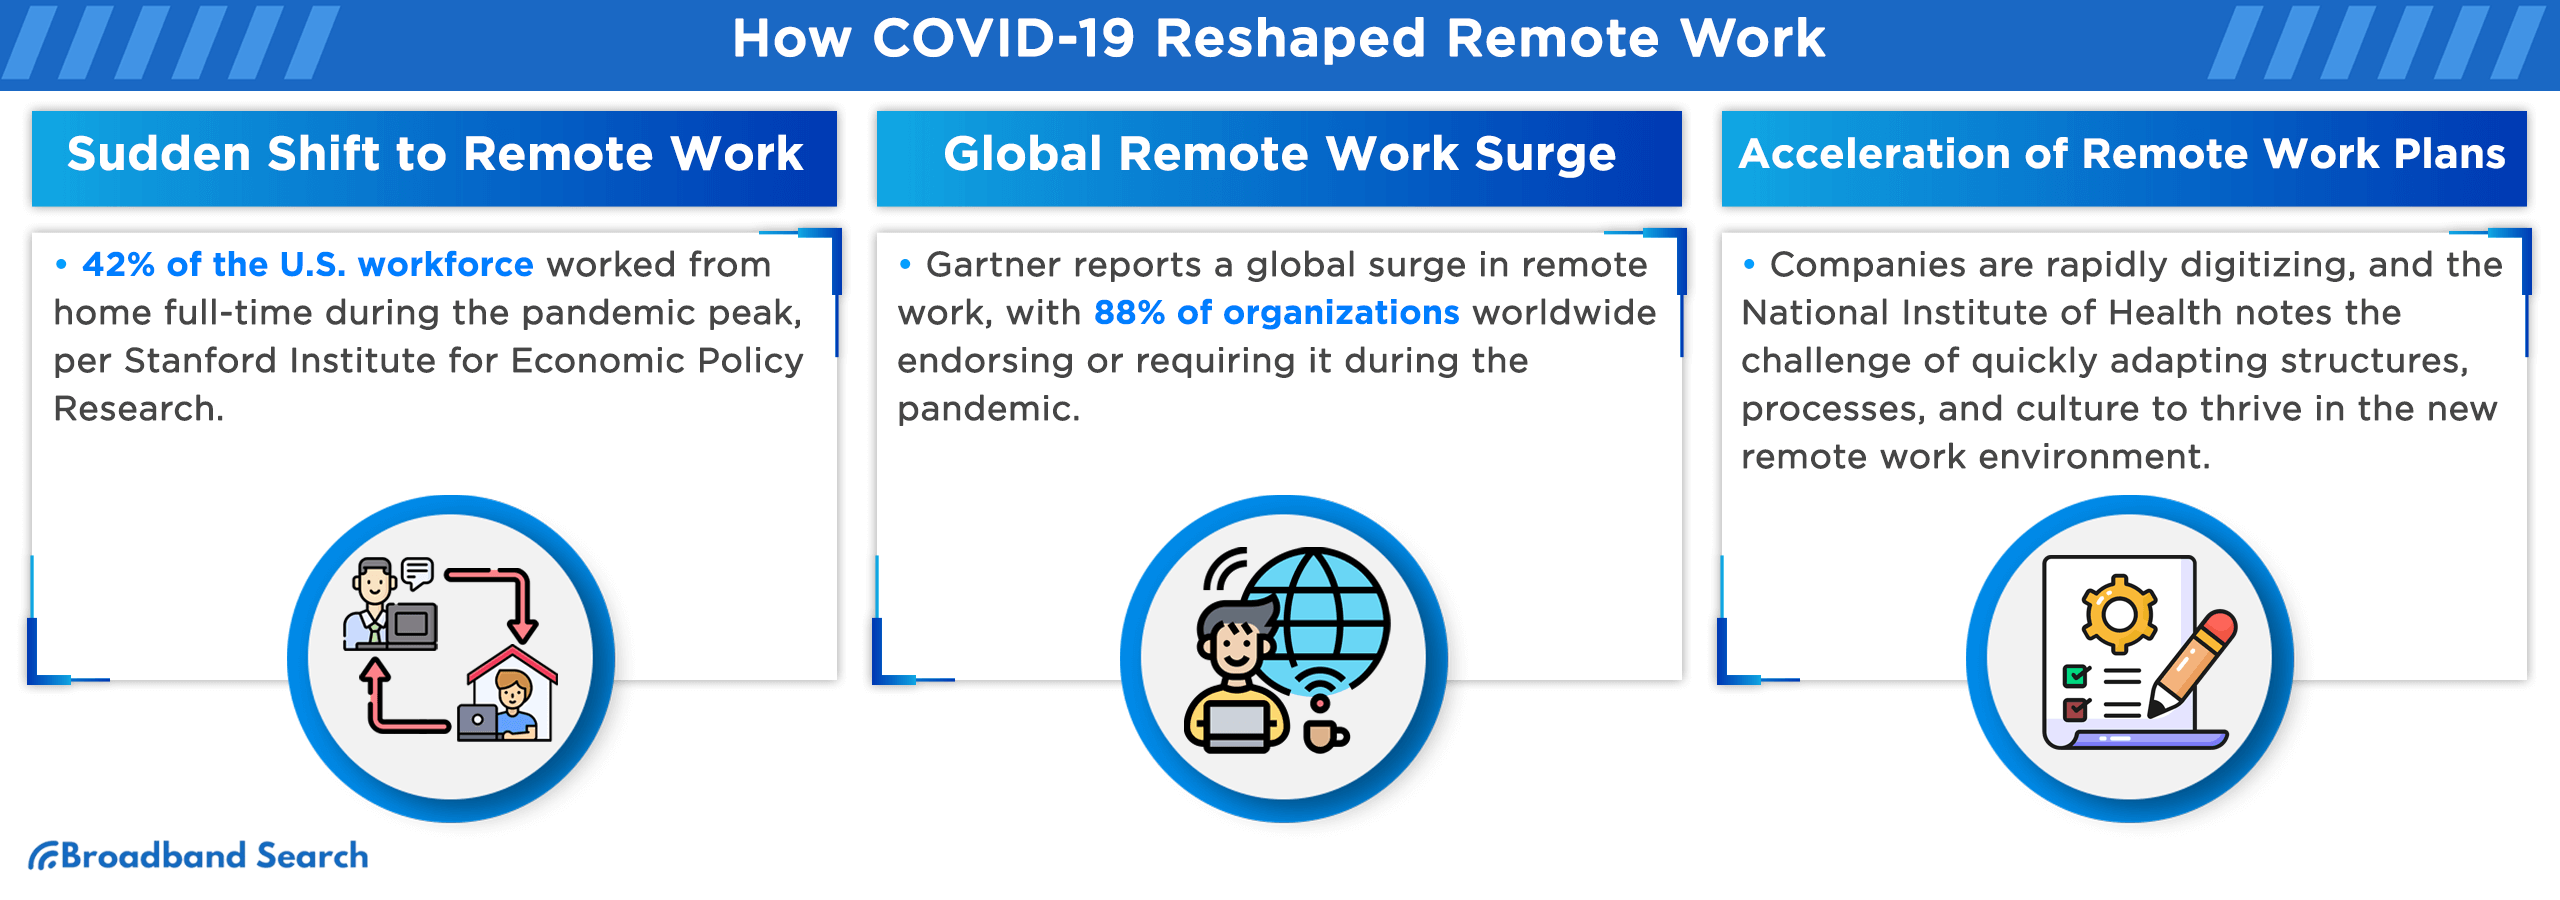 Three key aspects on how Covid-19 reshaped remote work